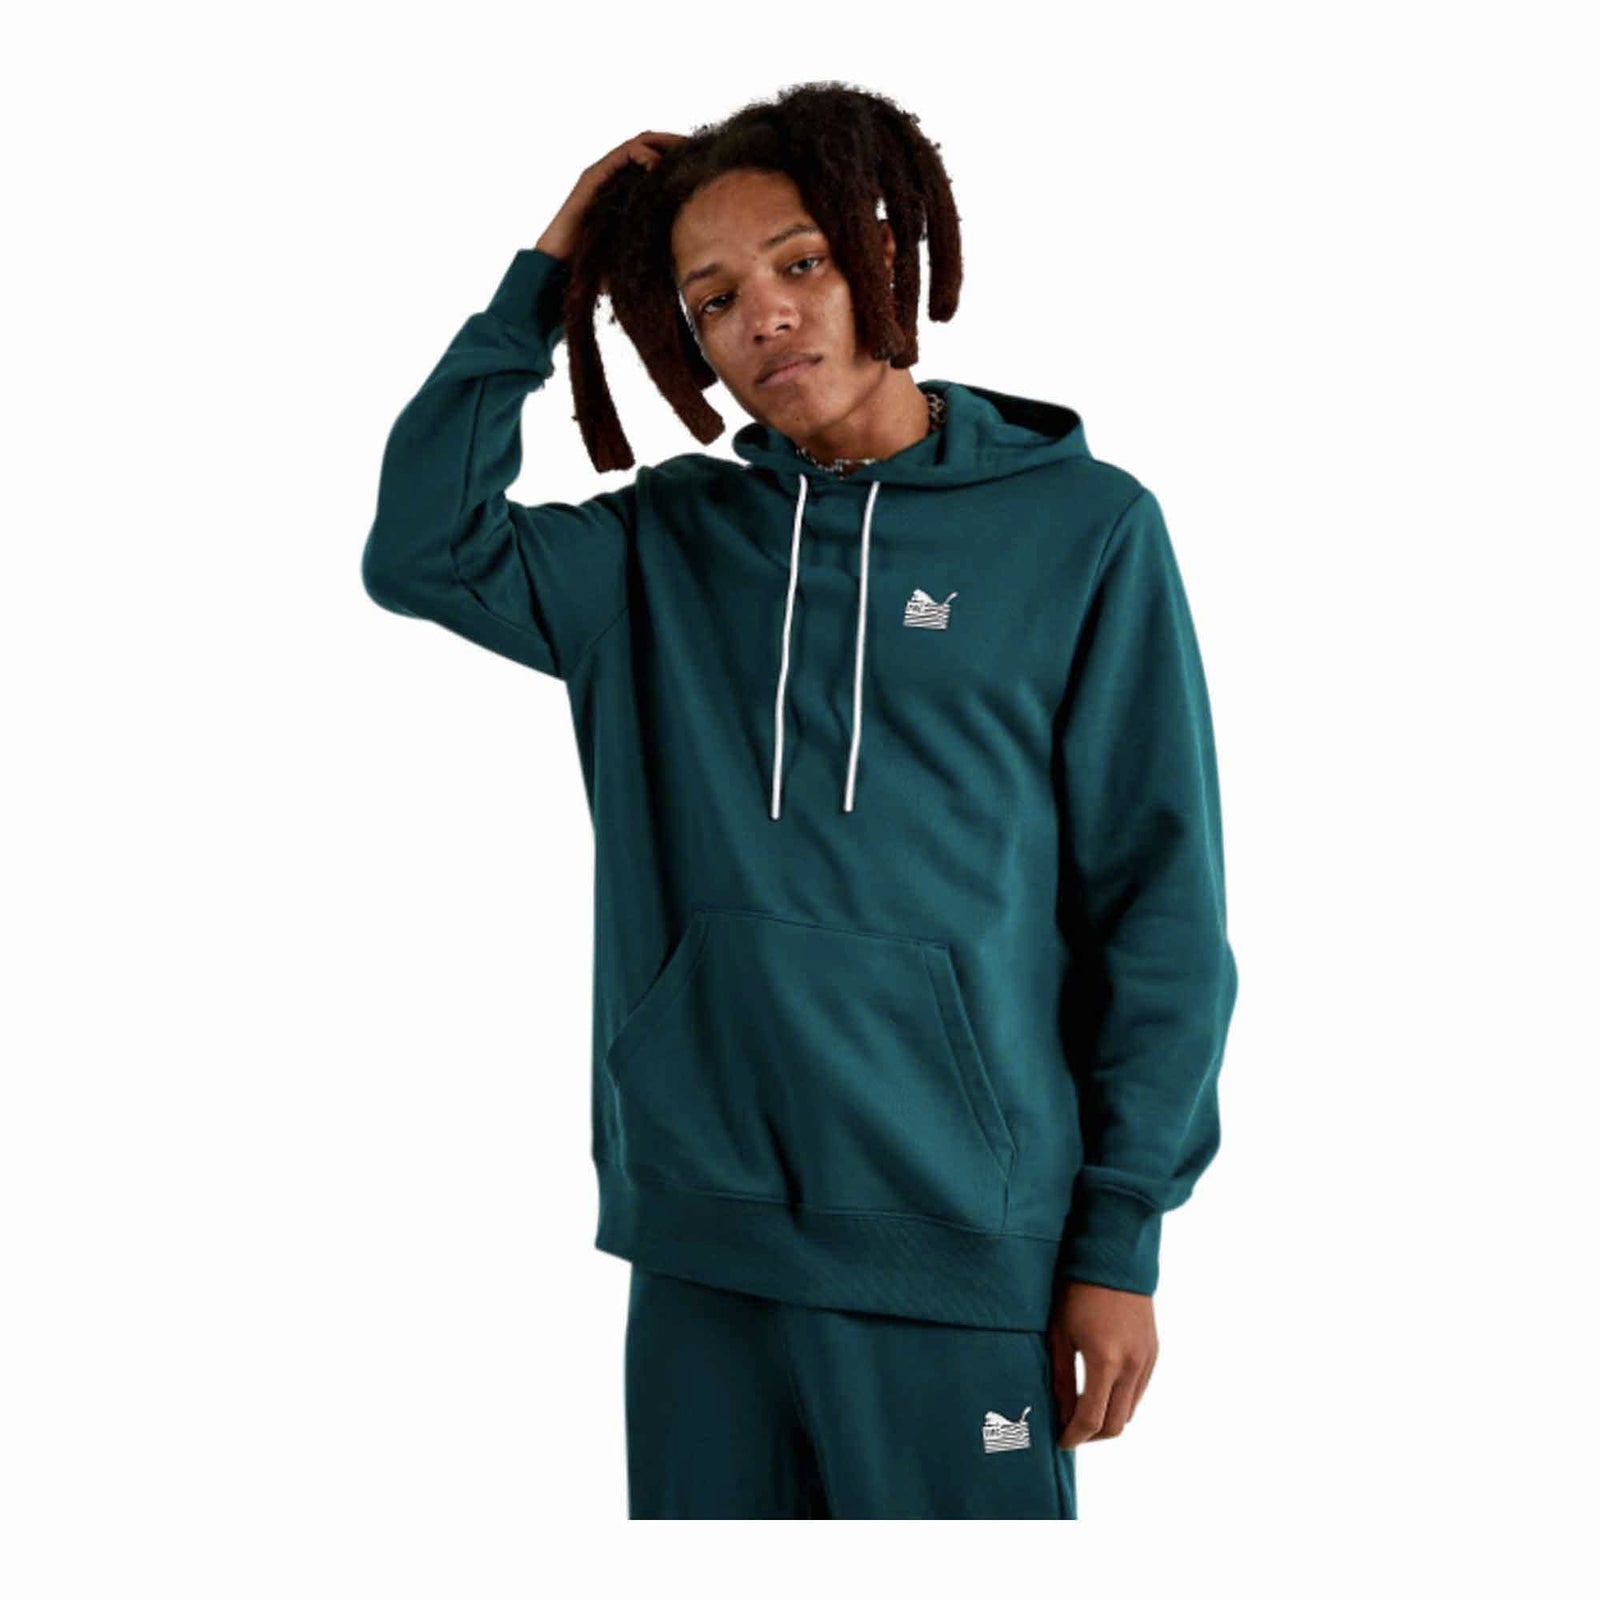 Nike Therma-FIT Starting 5 Men's Pullover Basketball Hoodie S by Millennium Shoes